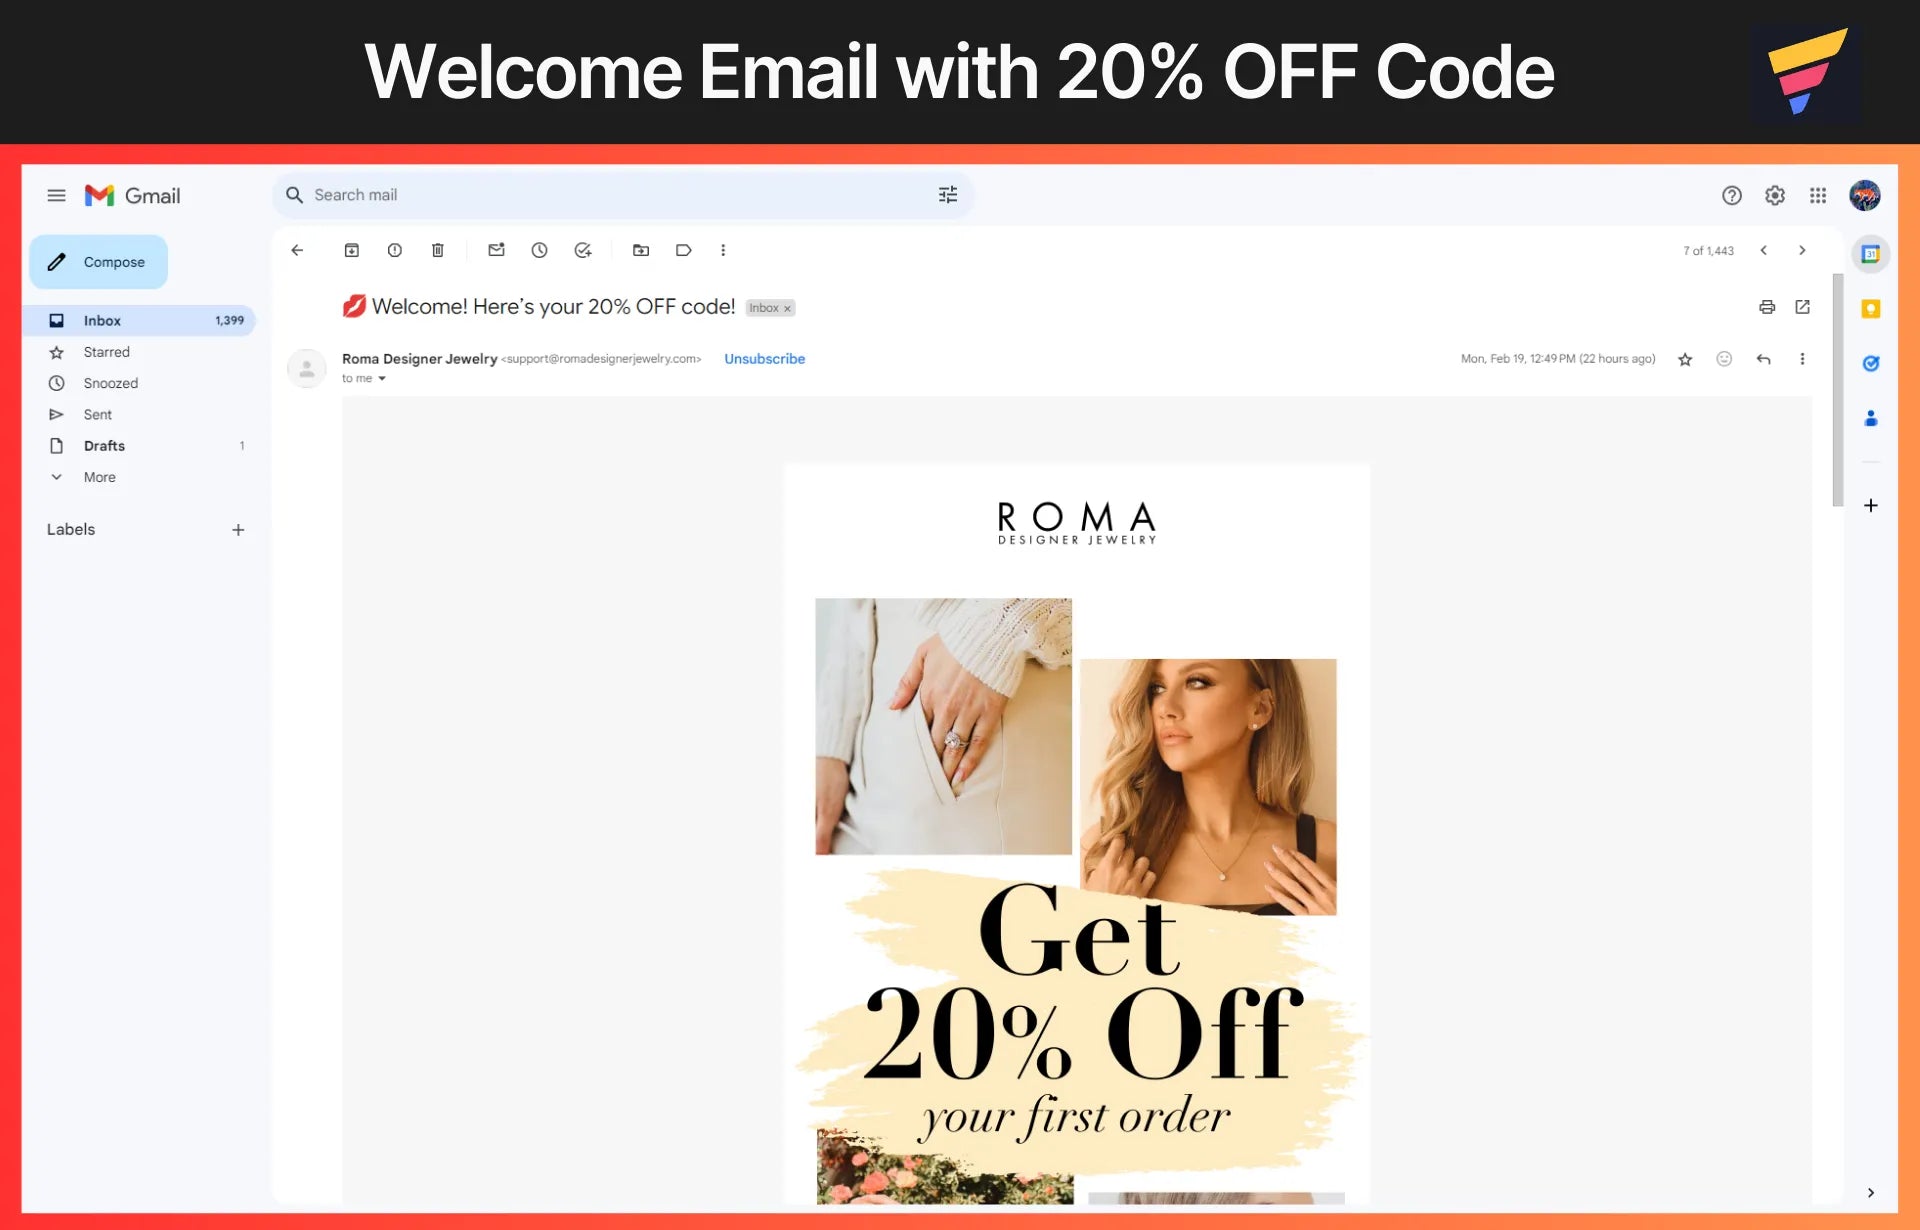 Roma’s welcome email with 20% off code